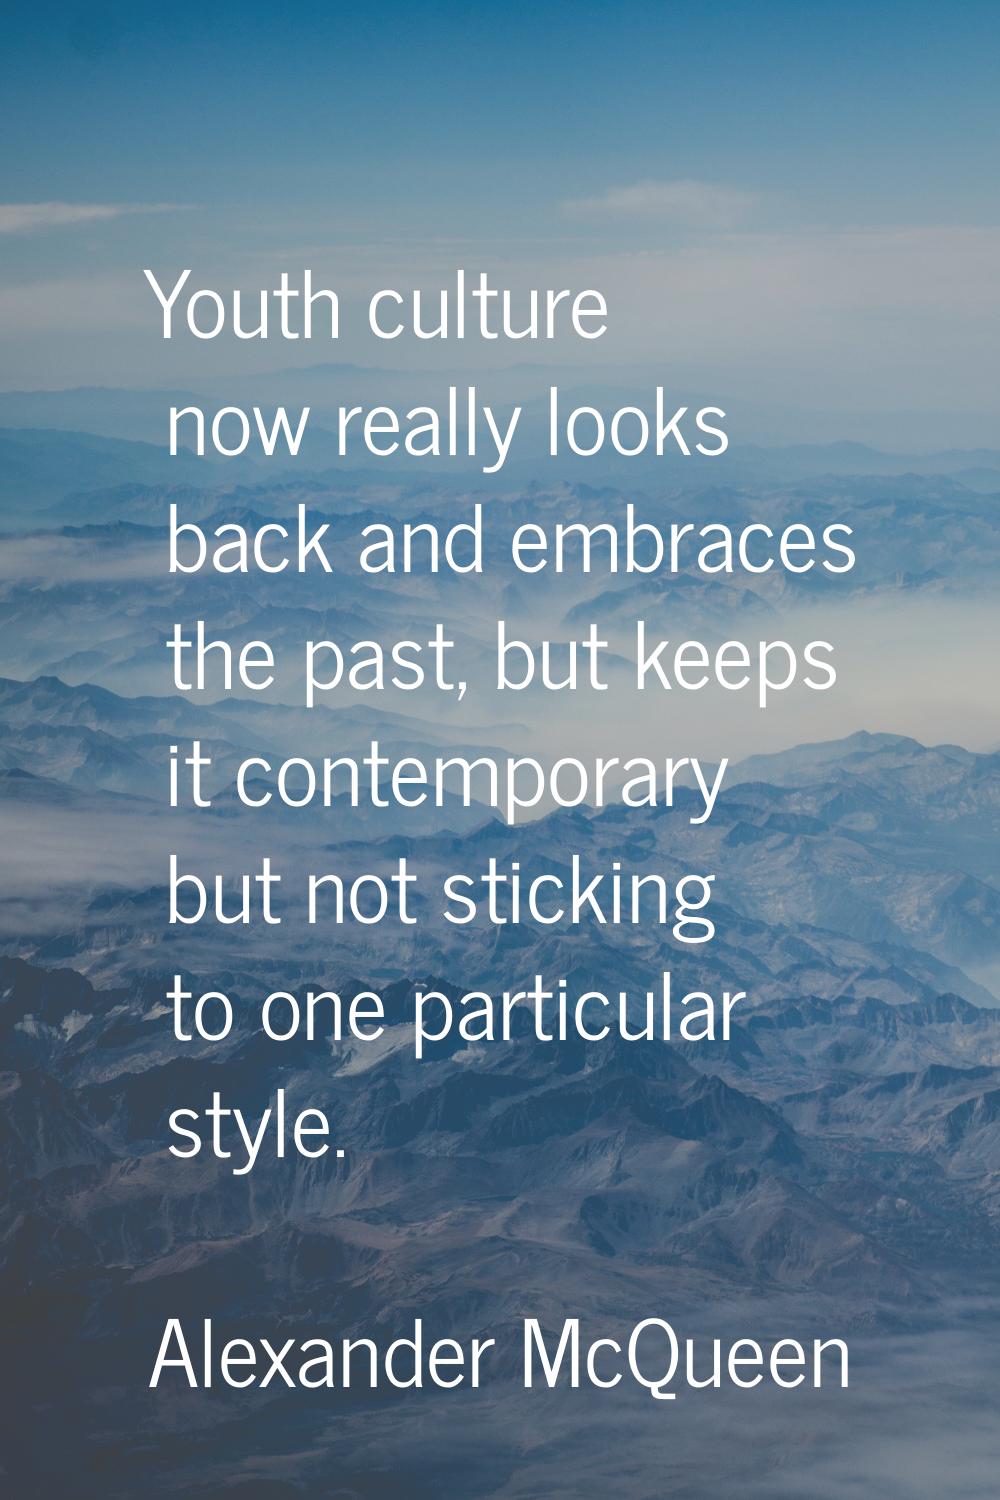 Youth culture now really looks back and embraces the past, but keeps it contemporary but not sticki